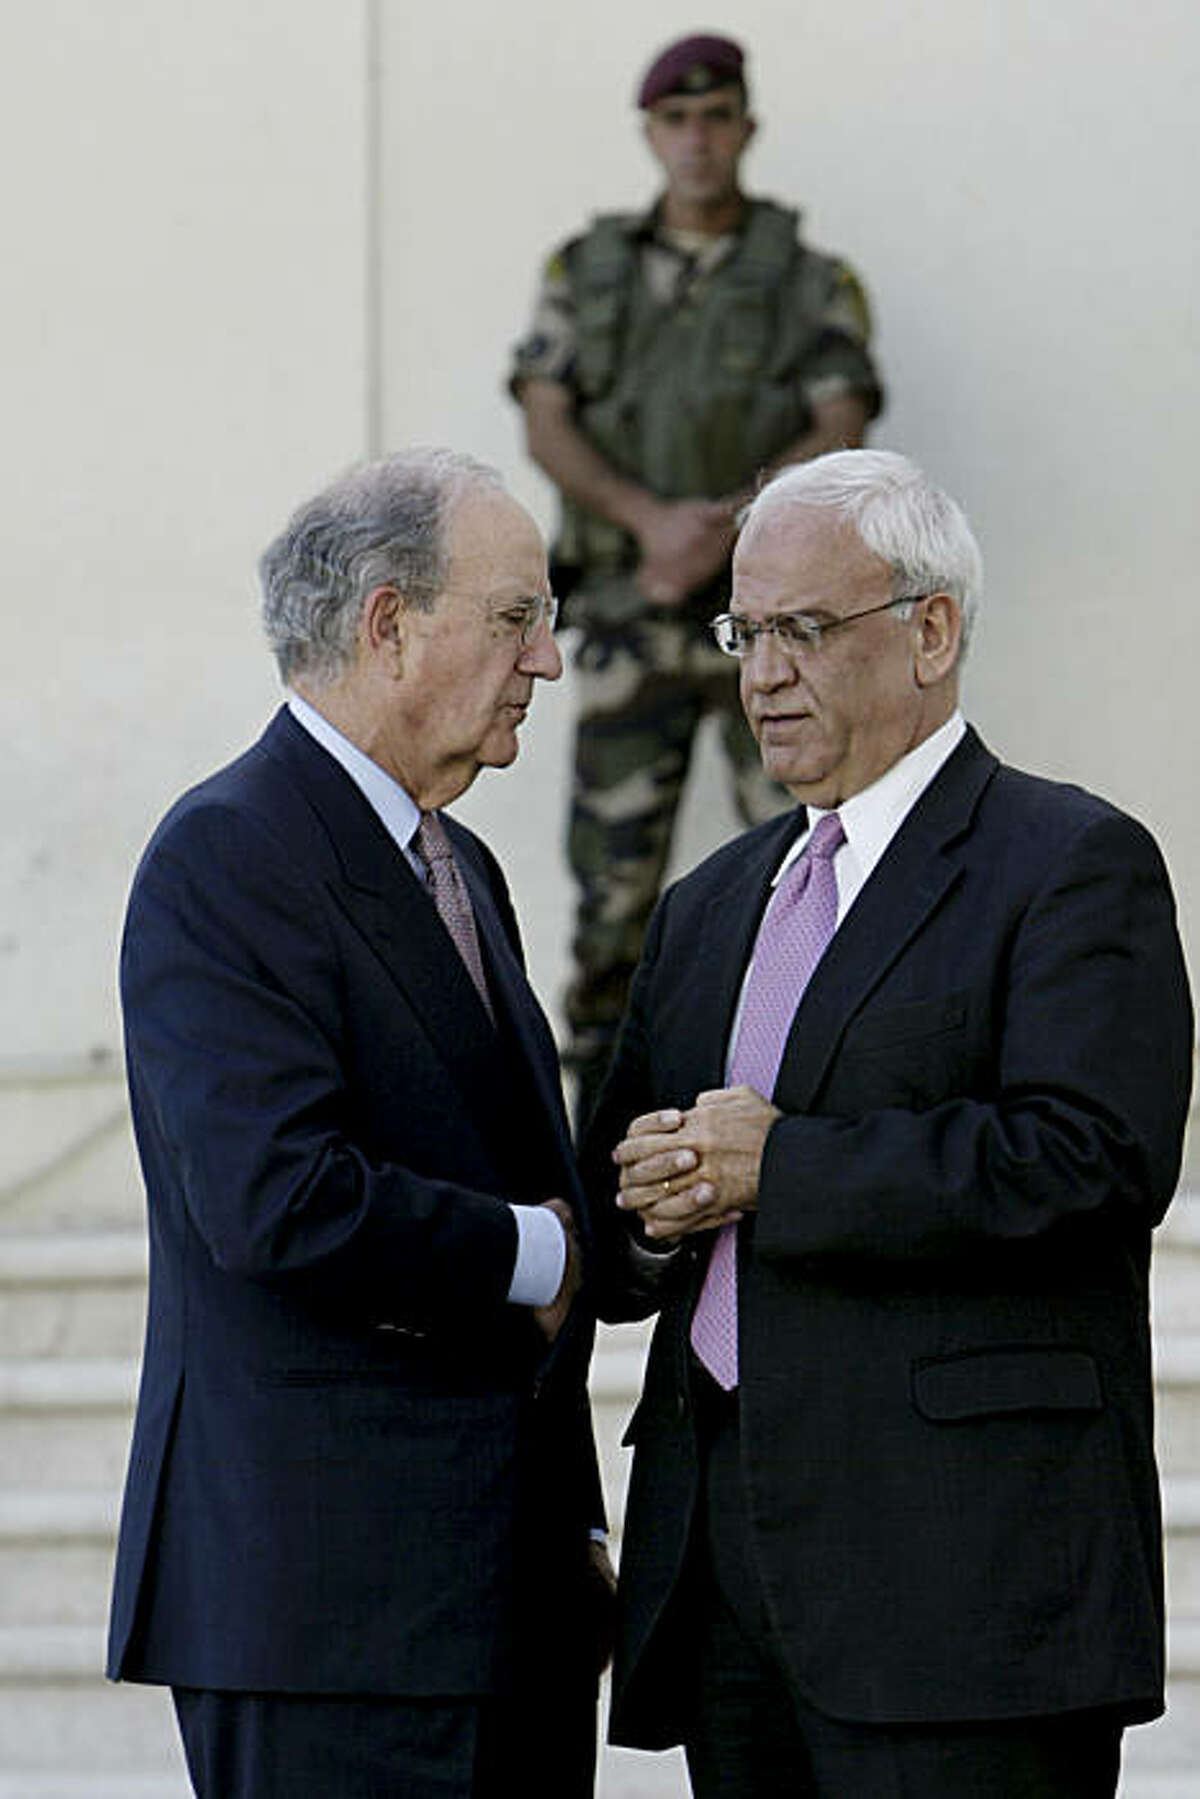 Special Envoy for Middle East Peace George Mitchell, left, and Chief Palestinian negotiator Saeb Erekat, right,are seen after a meeting with Palestinian President Mahmoud Abbas, in the West Bank city of Ramallah in the West Bank city of Ramallah, Thursday, Sept. 30, 2010. A U.S. emissary racing against the clock to salvage Mideast peace negotiations scheduled another quick round of meetings with Israeli and Palestinian leaders after talks Thursday with Palestinian President Mahmoud Abbas ended inconclusively.